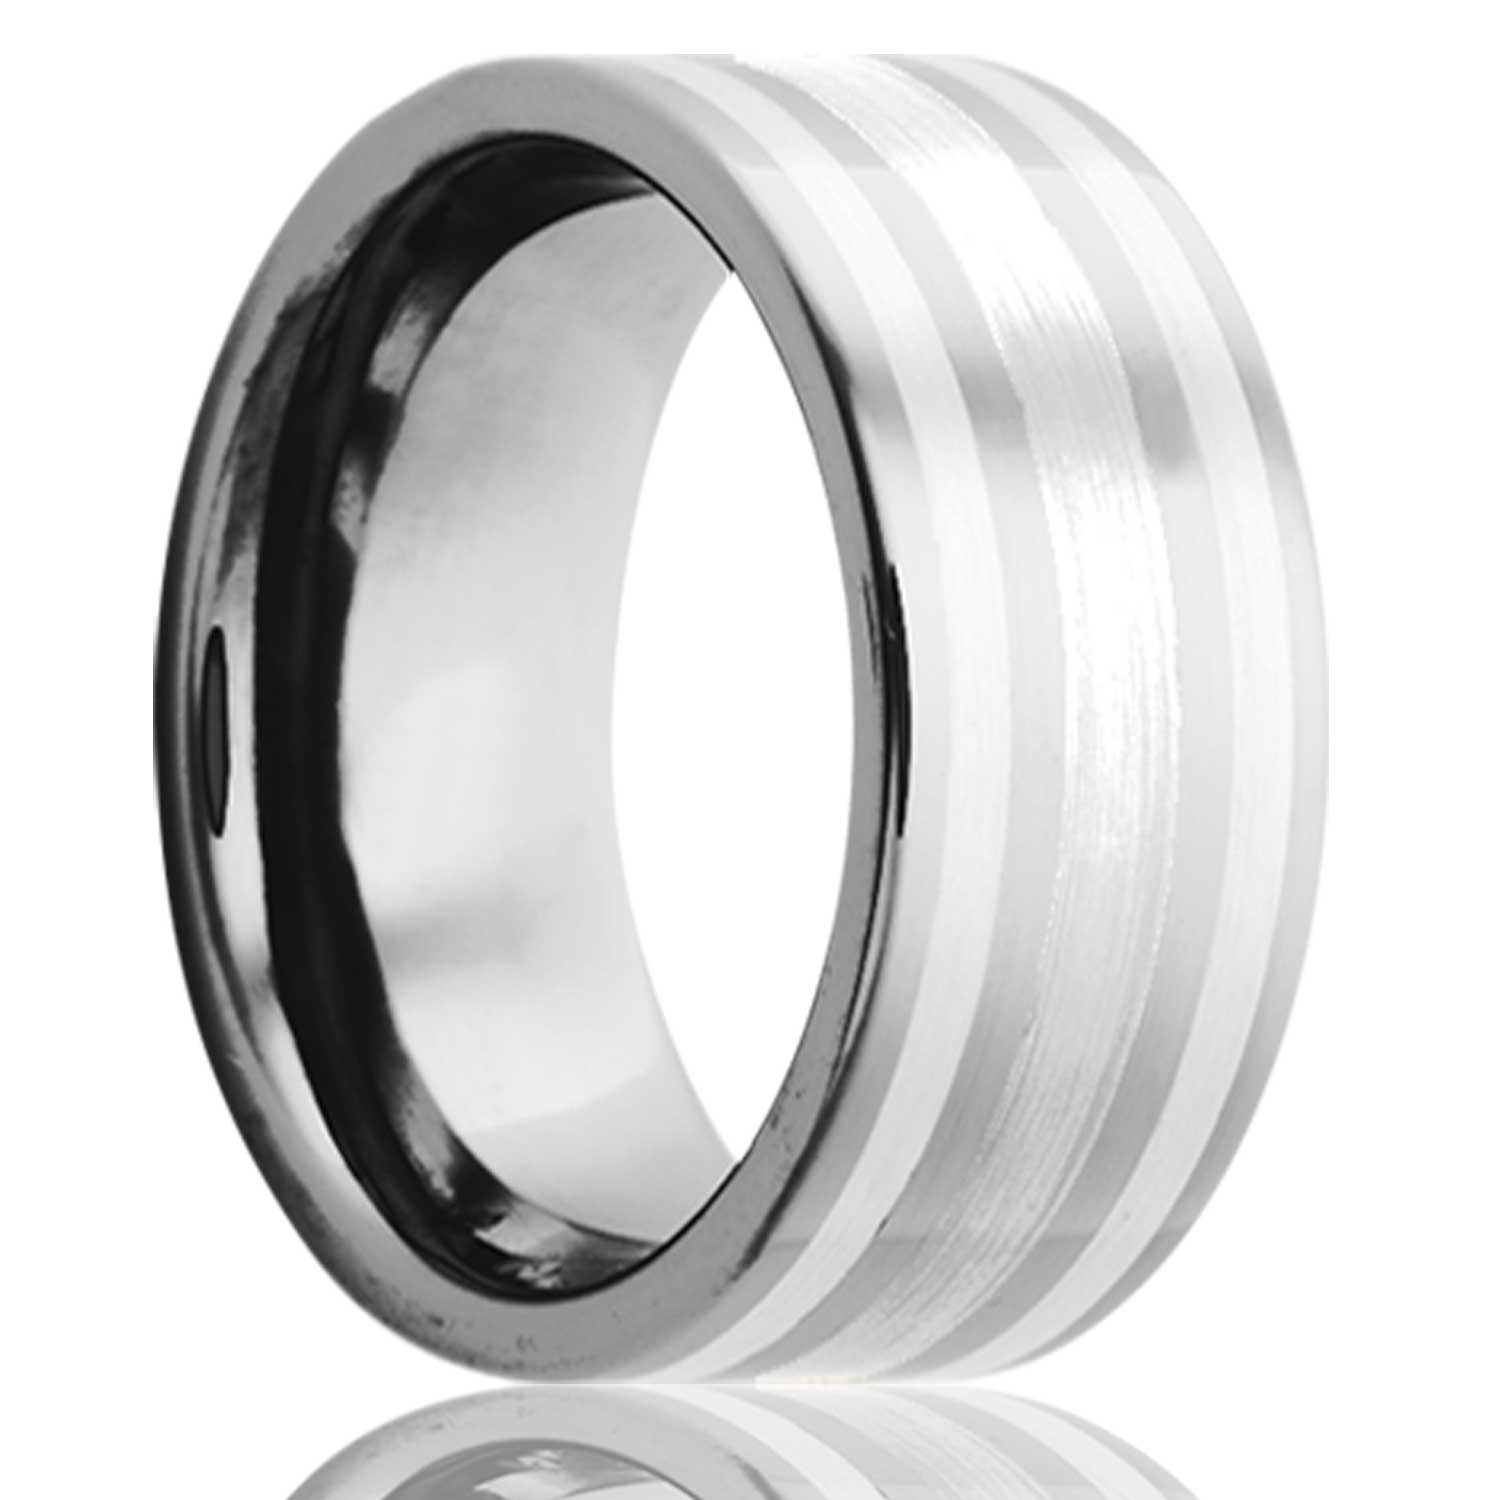 A triple argentium silver inlay cobalt men's wedding band displayed on a neutral white background.